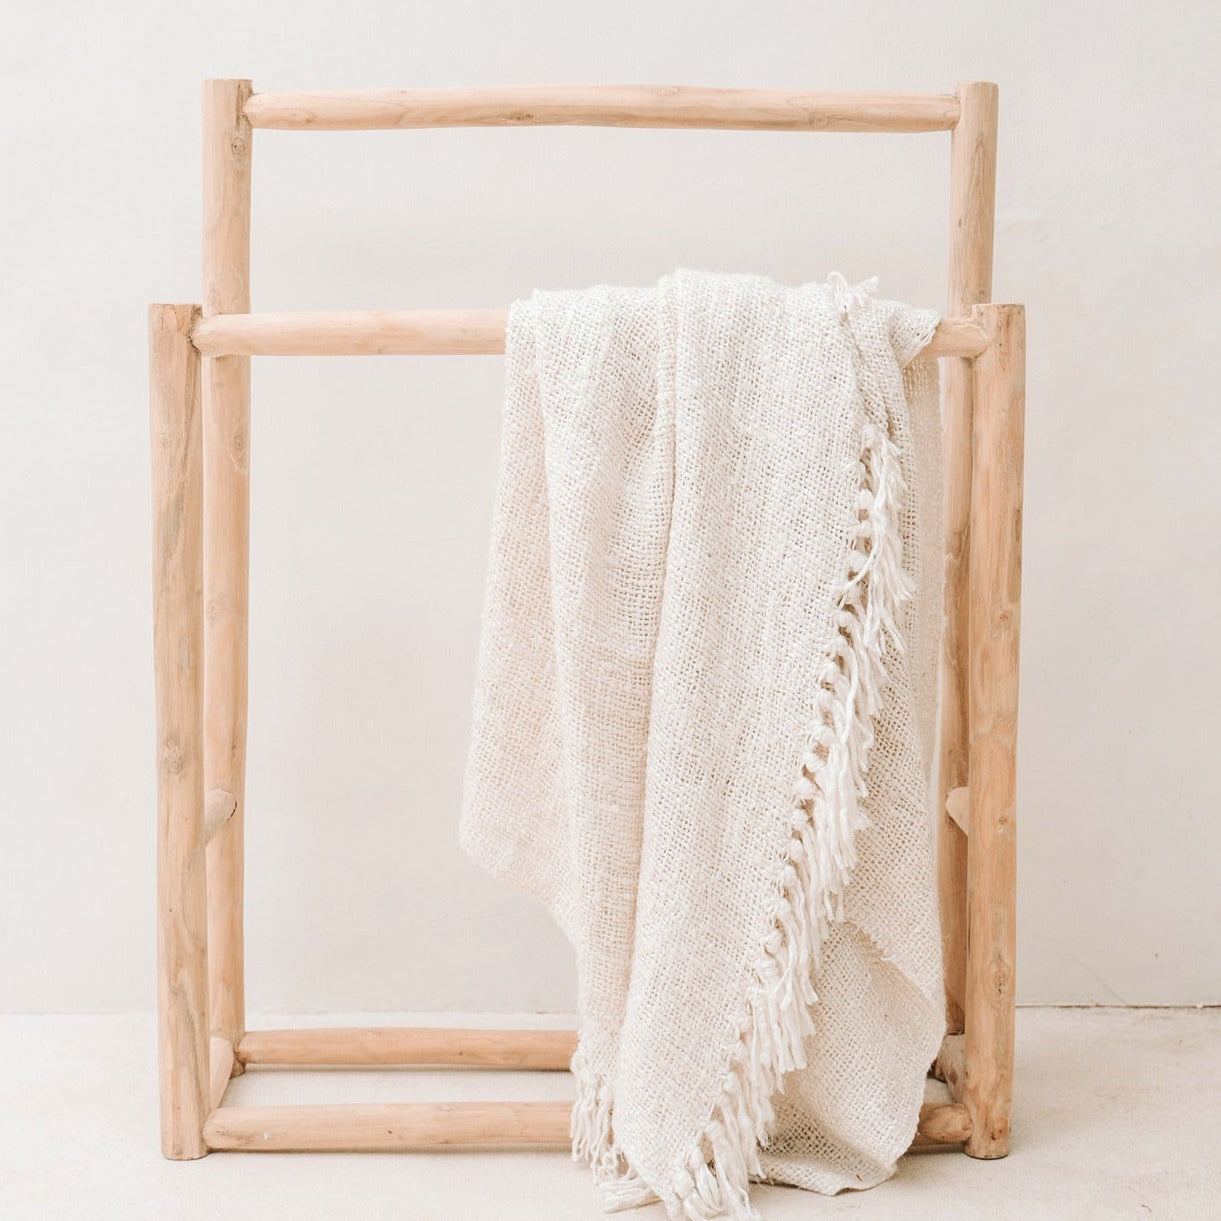 THE S'IL VOUS Plaid Cream in wooden ladder